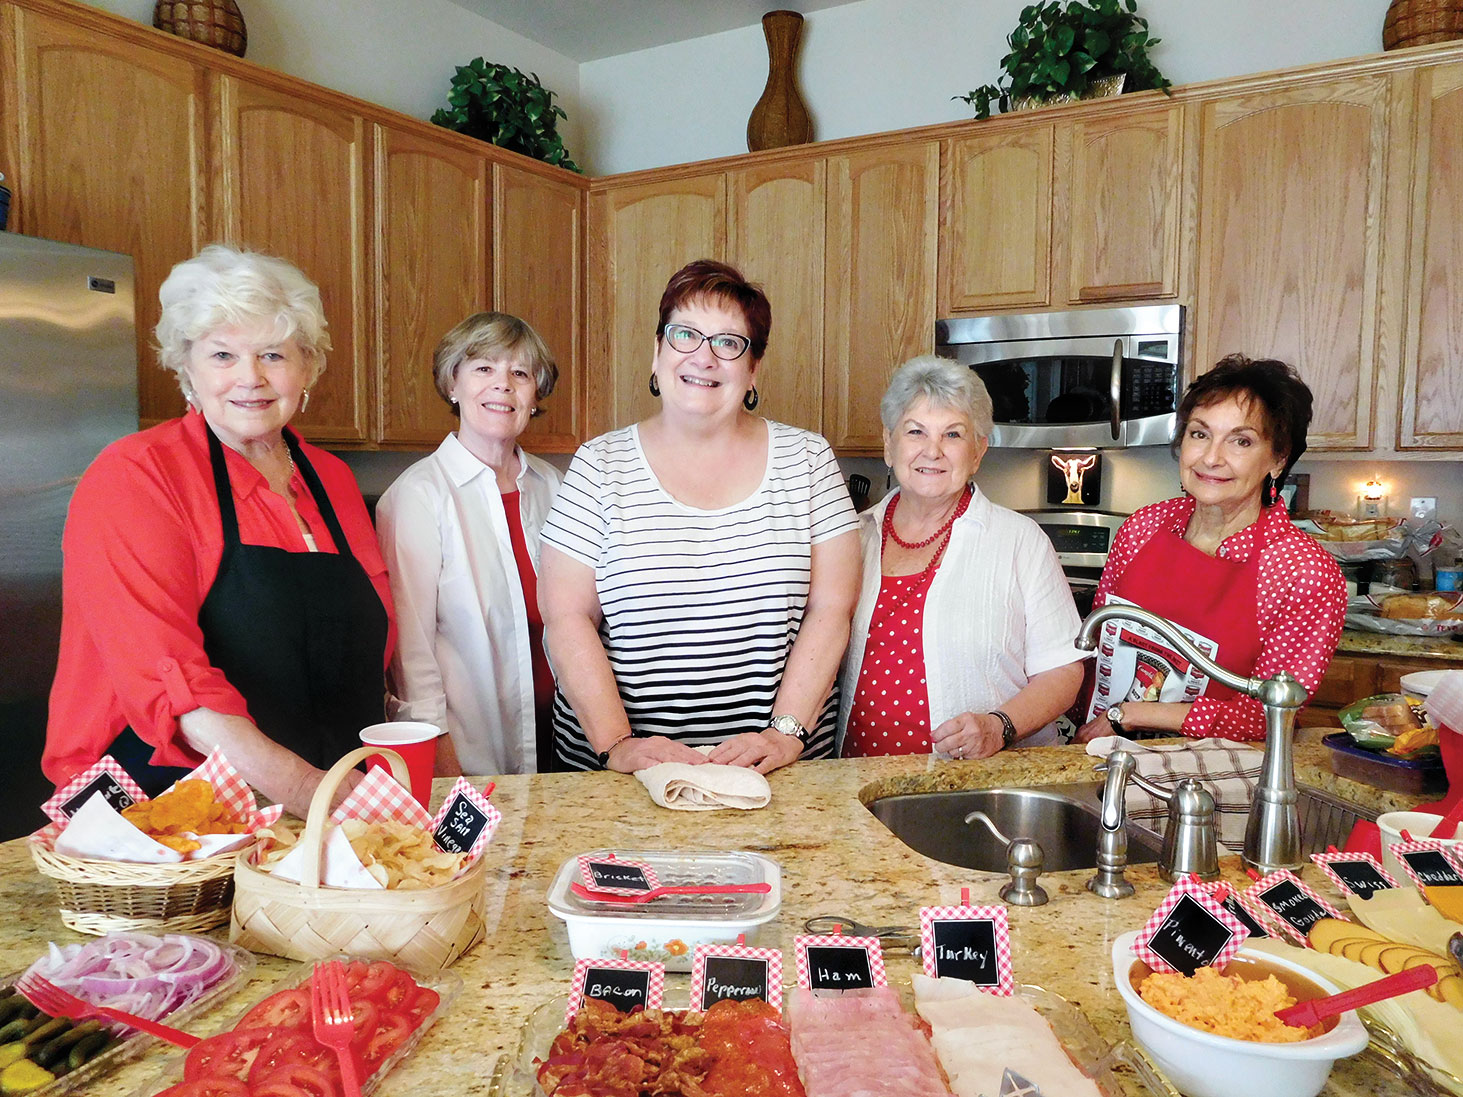 Left to right: Cheesy Chicks Joan Krause, Rosemary Weinstein, Gayle Coe, Jan Utzman and Peggy Crandell